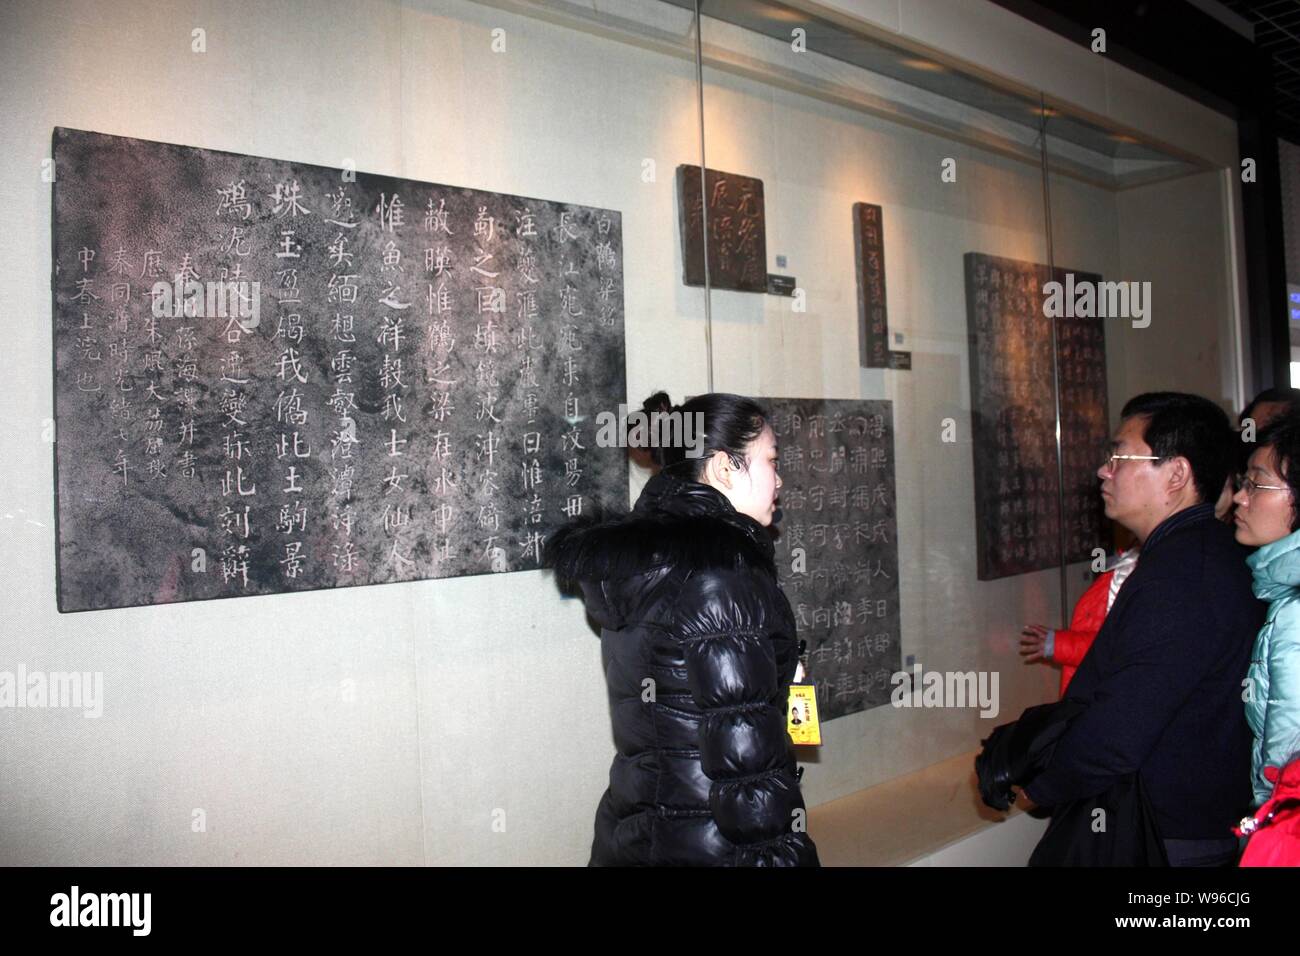 A guide introduces stone tablets to visitors at Baiheliang underwater museum in Chongqing, China, 12 March 2012.   Baiheliang, an ancient hydrological Stock Photo